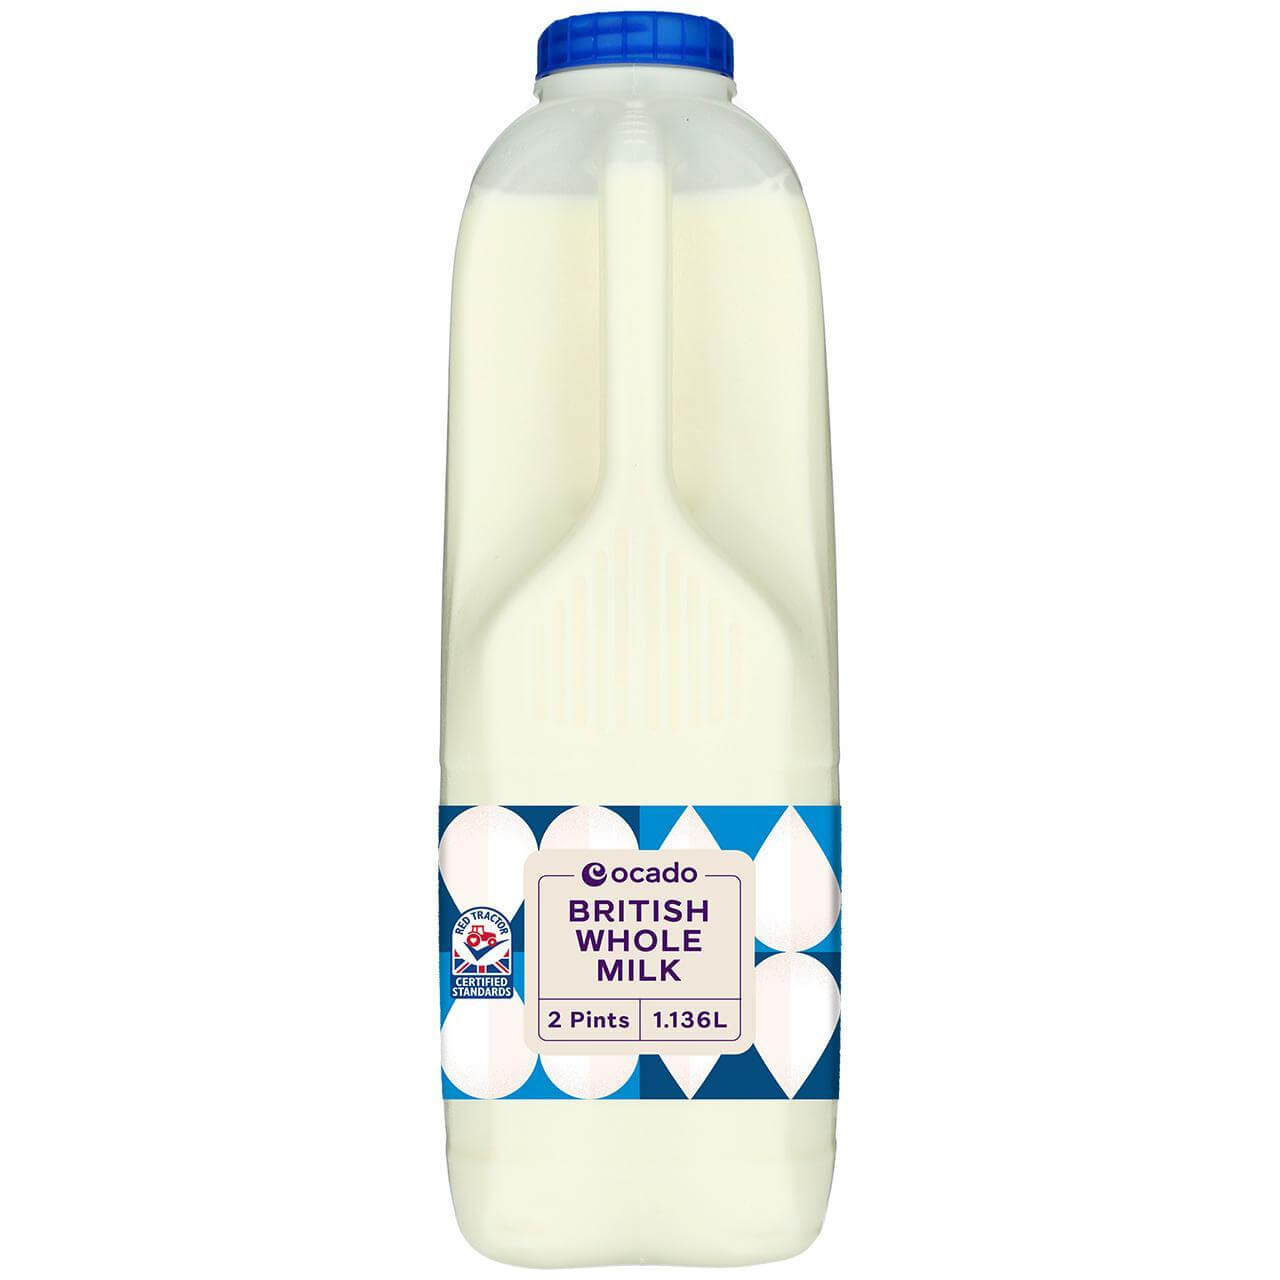 Image of Fresh Whole Milk made in the UK by Ocado. Buying this product supports a UK business, jobs and the local community